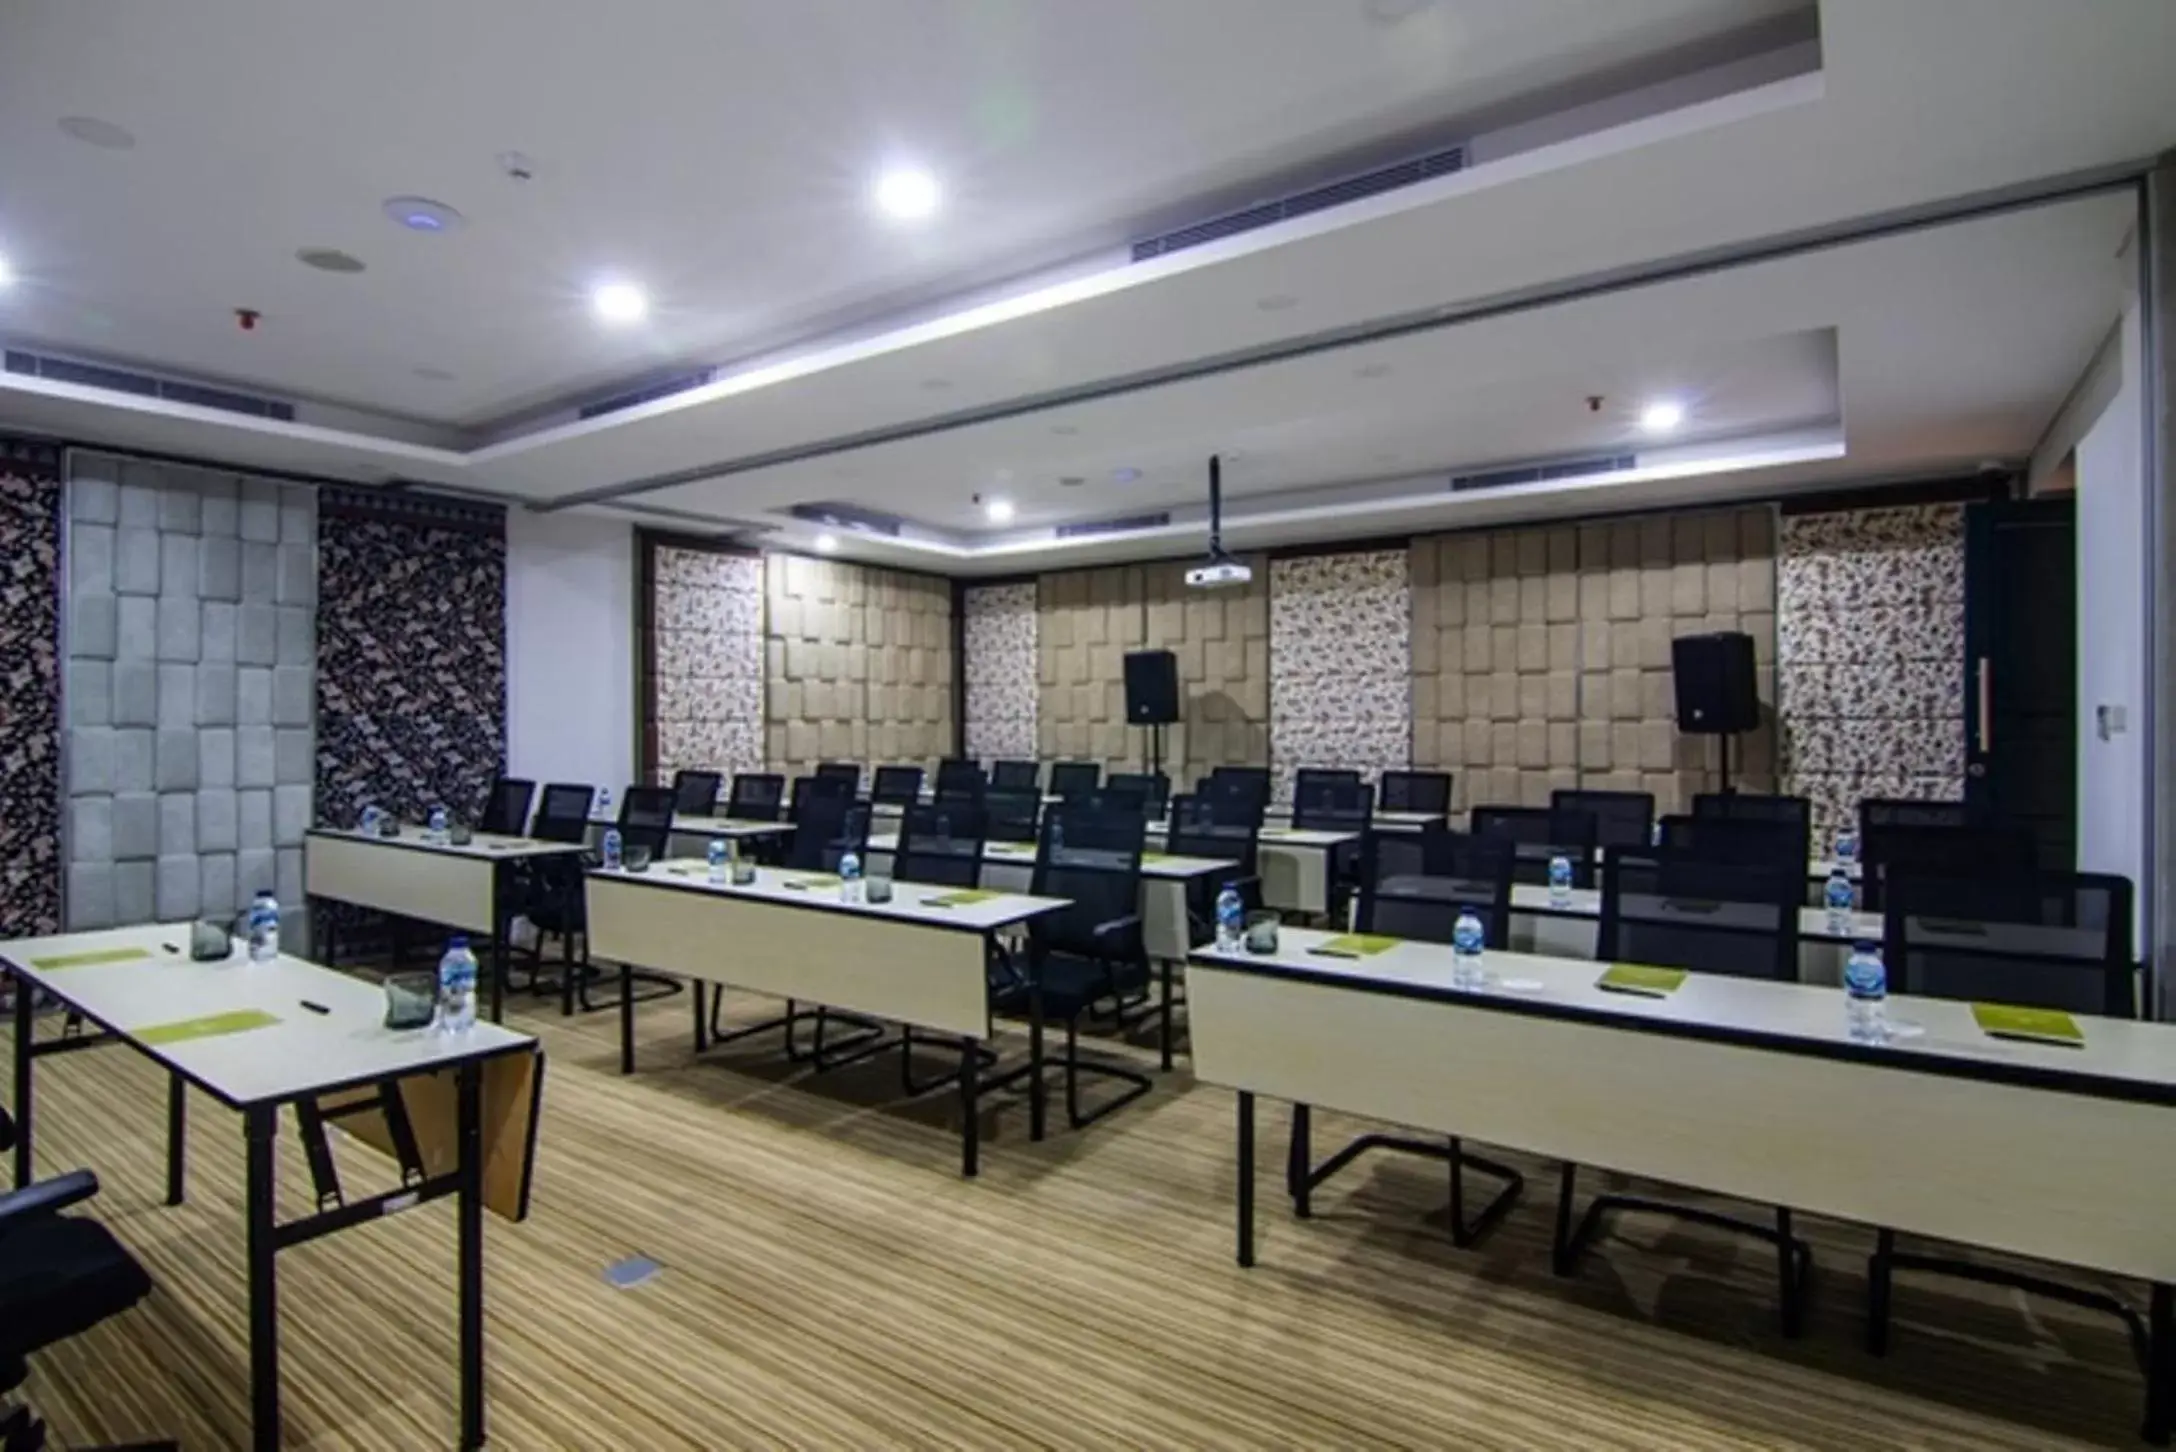 Meeting/conference room in Jambuluwuk Thamrin Hotel